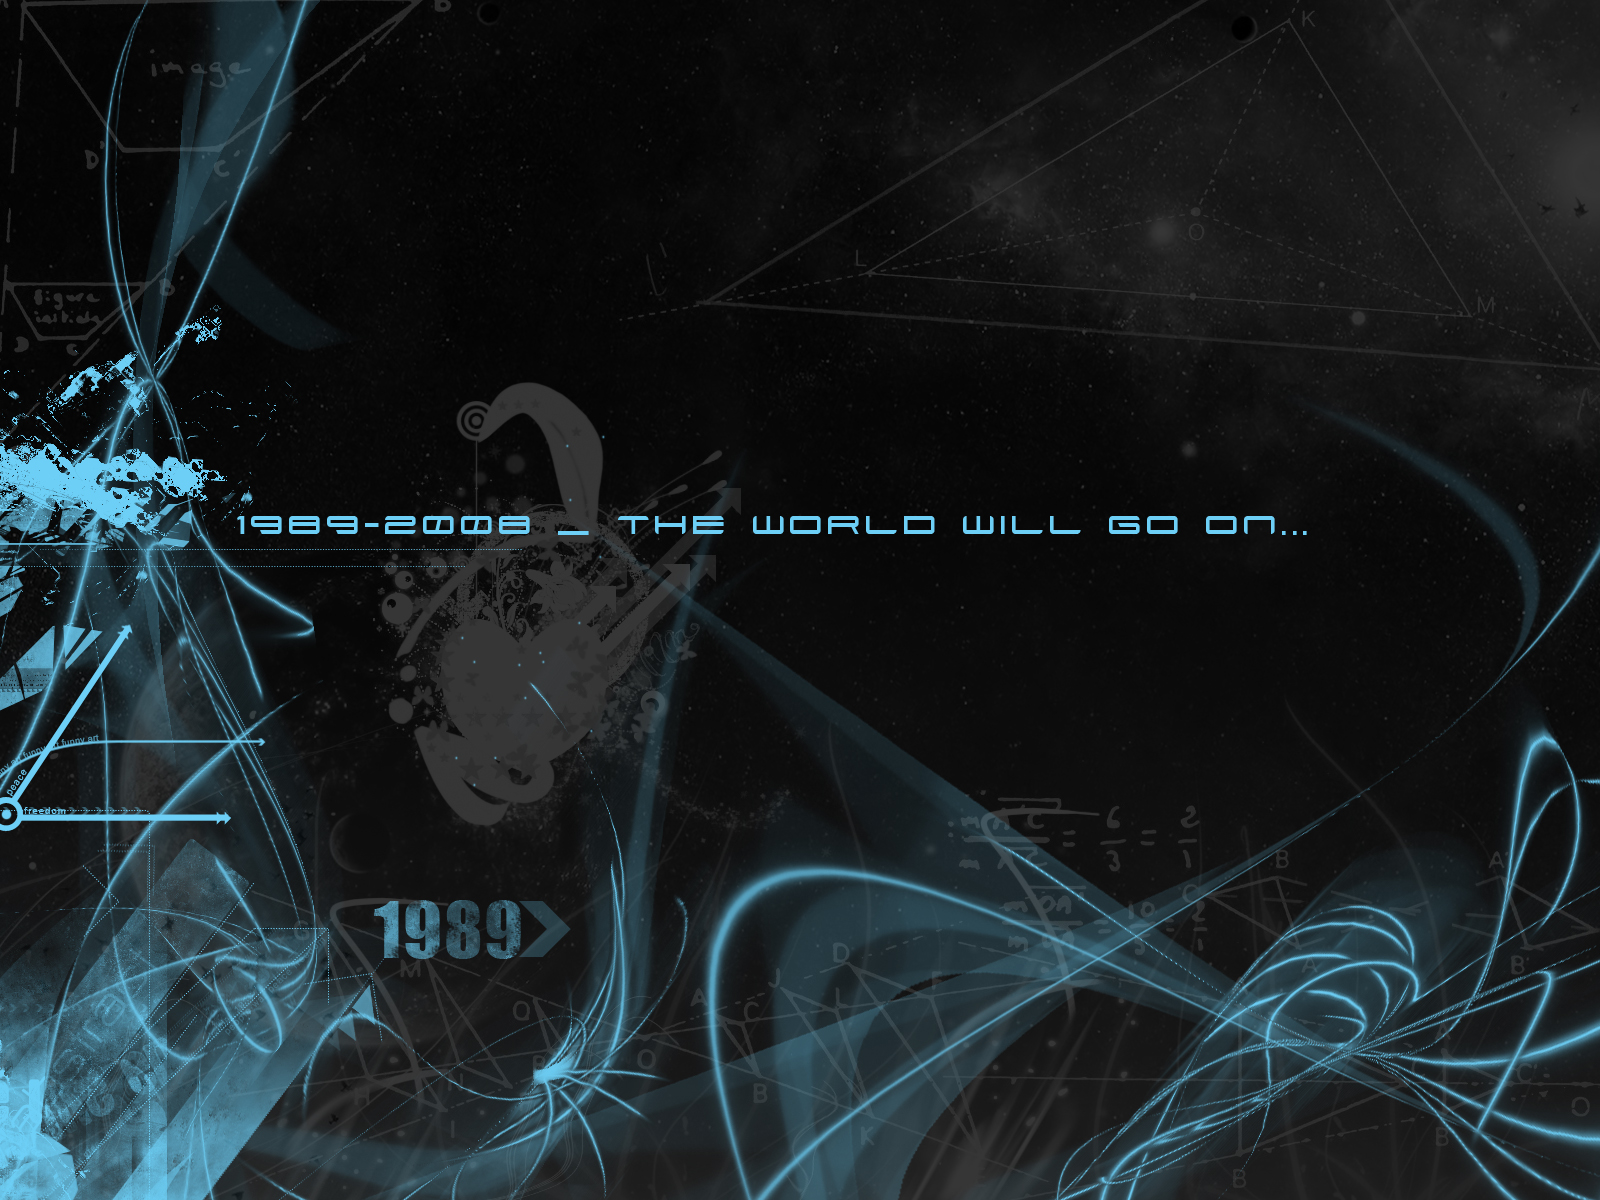 World go On by Akyra2k7 Pack de Wallpapers Vectoriales n.1